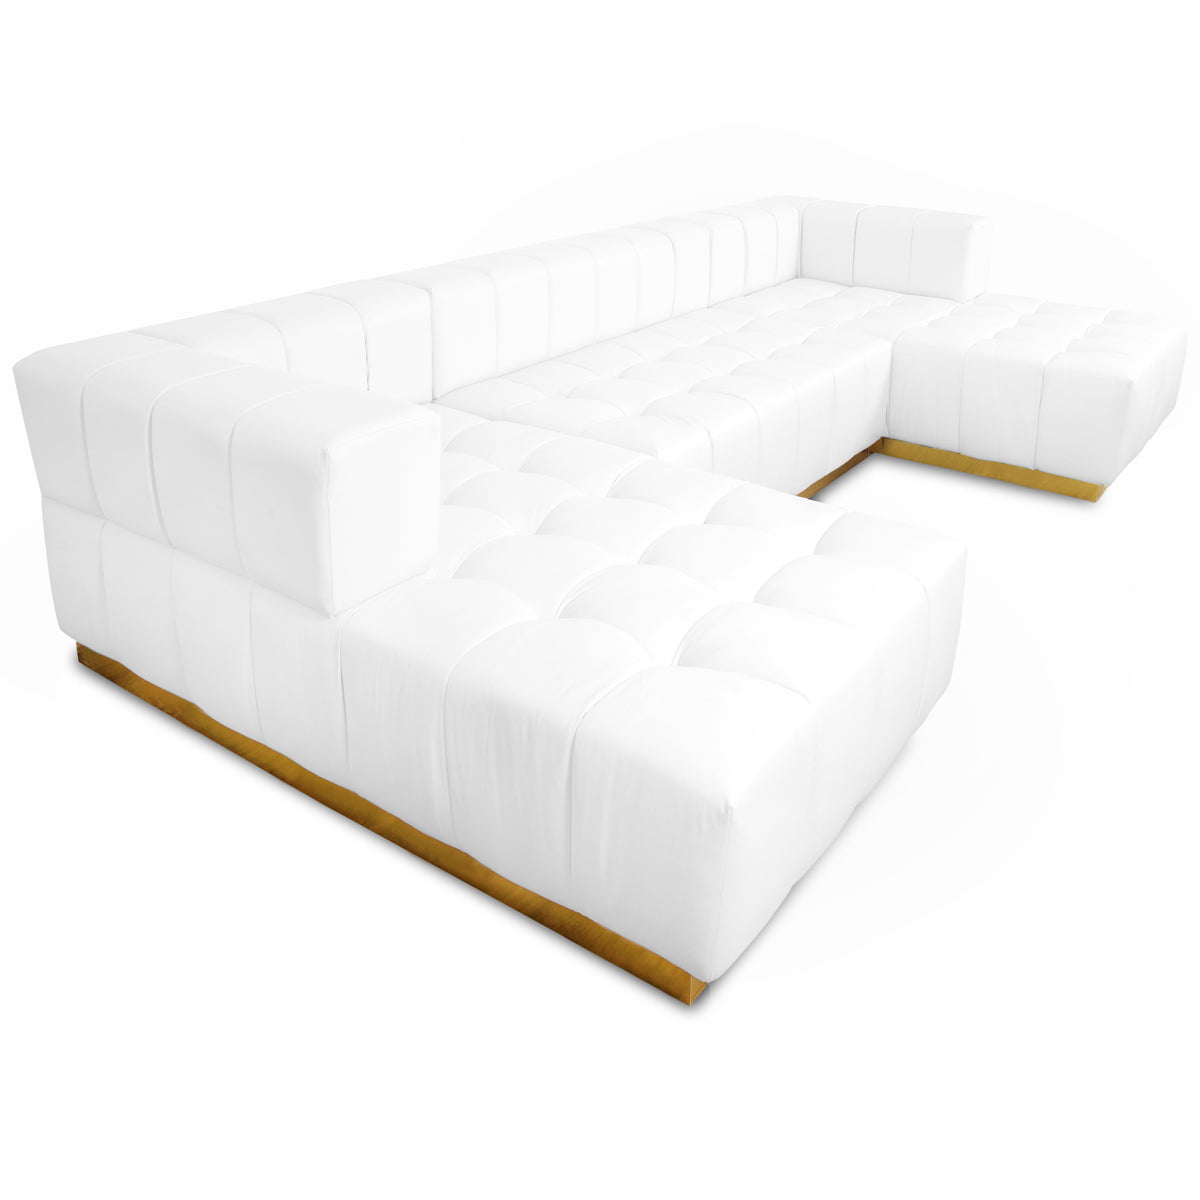 Delano Modular Sectional in Faux Leather - ModShop1.com